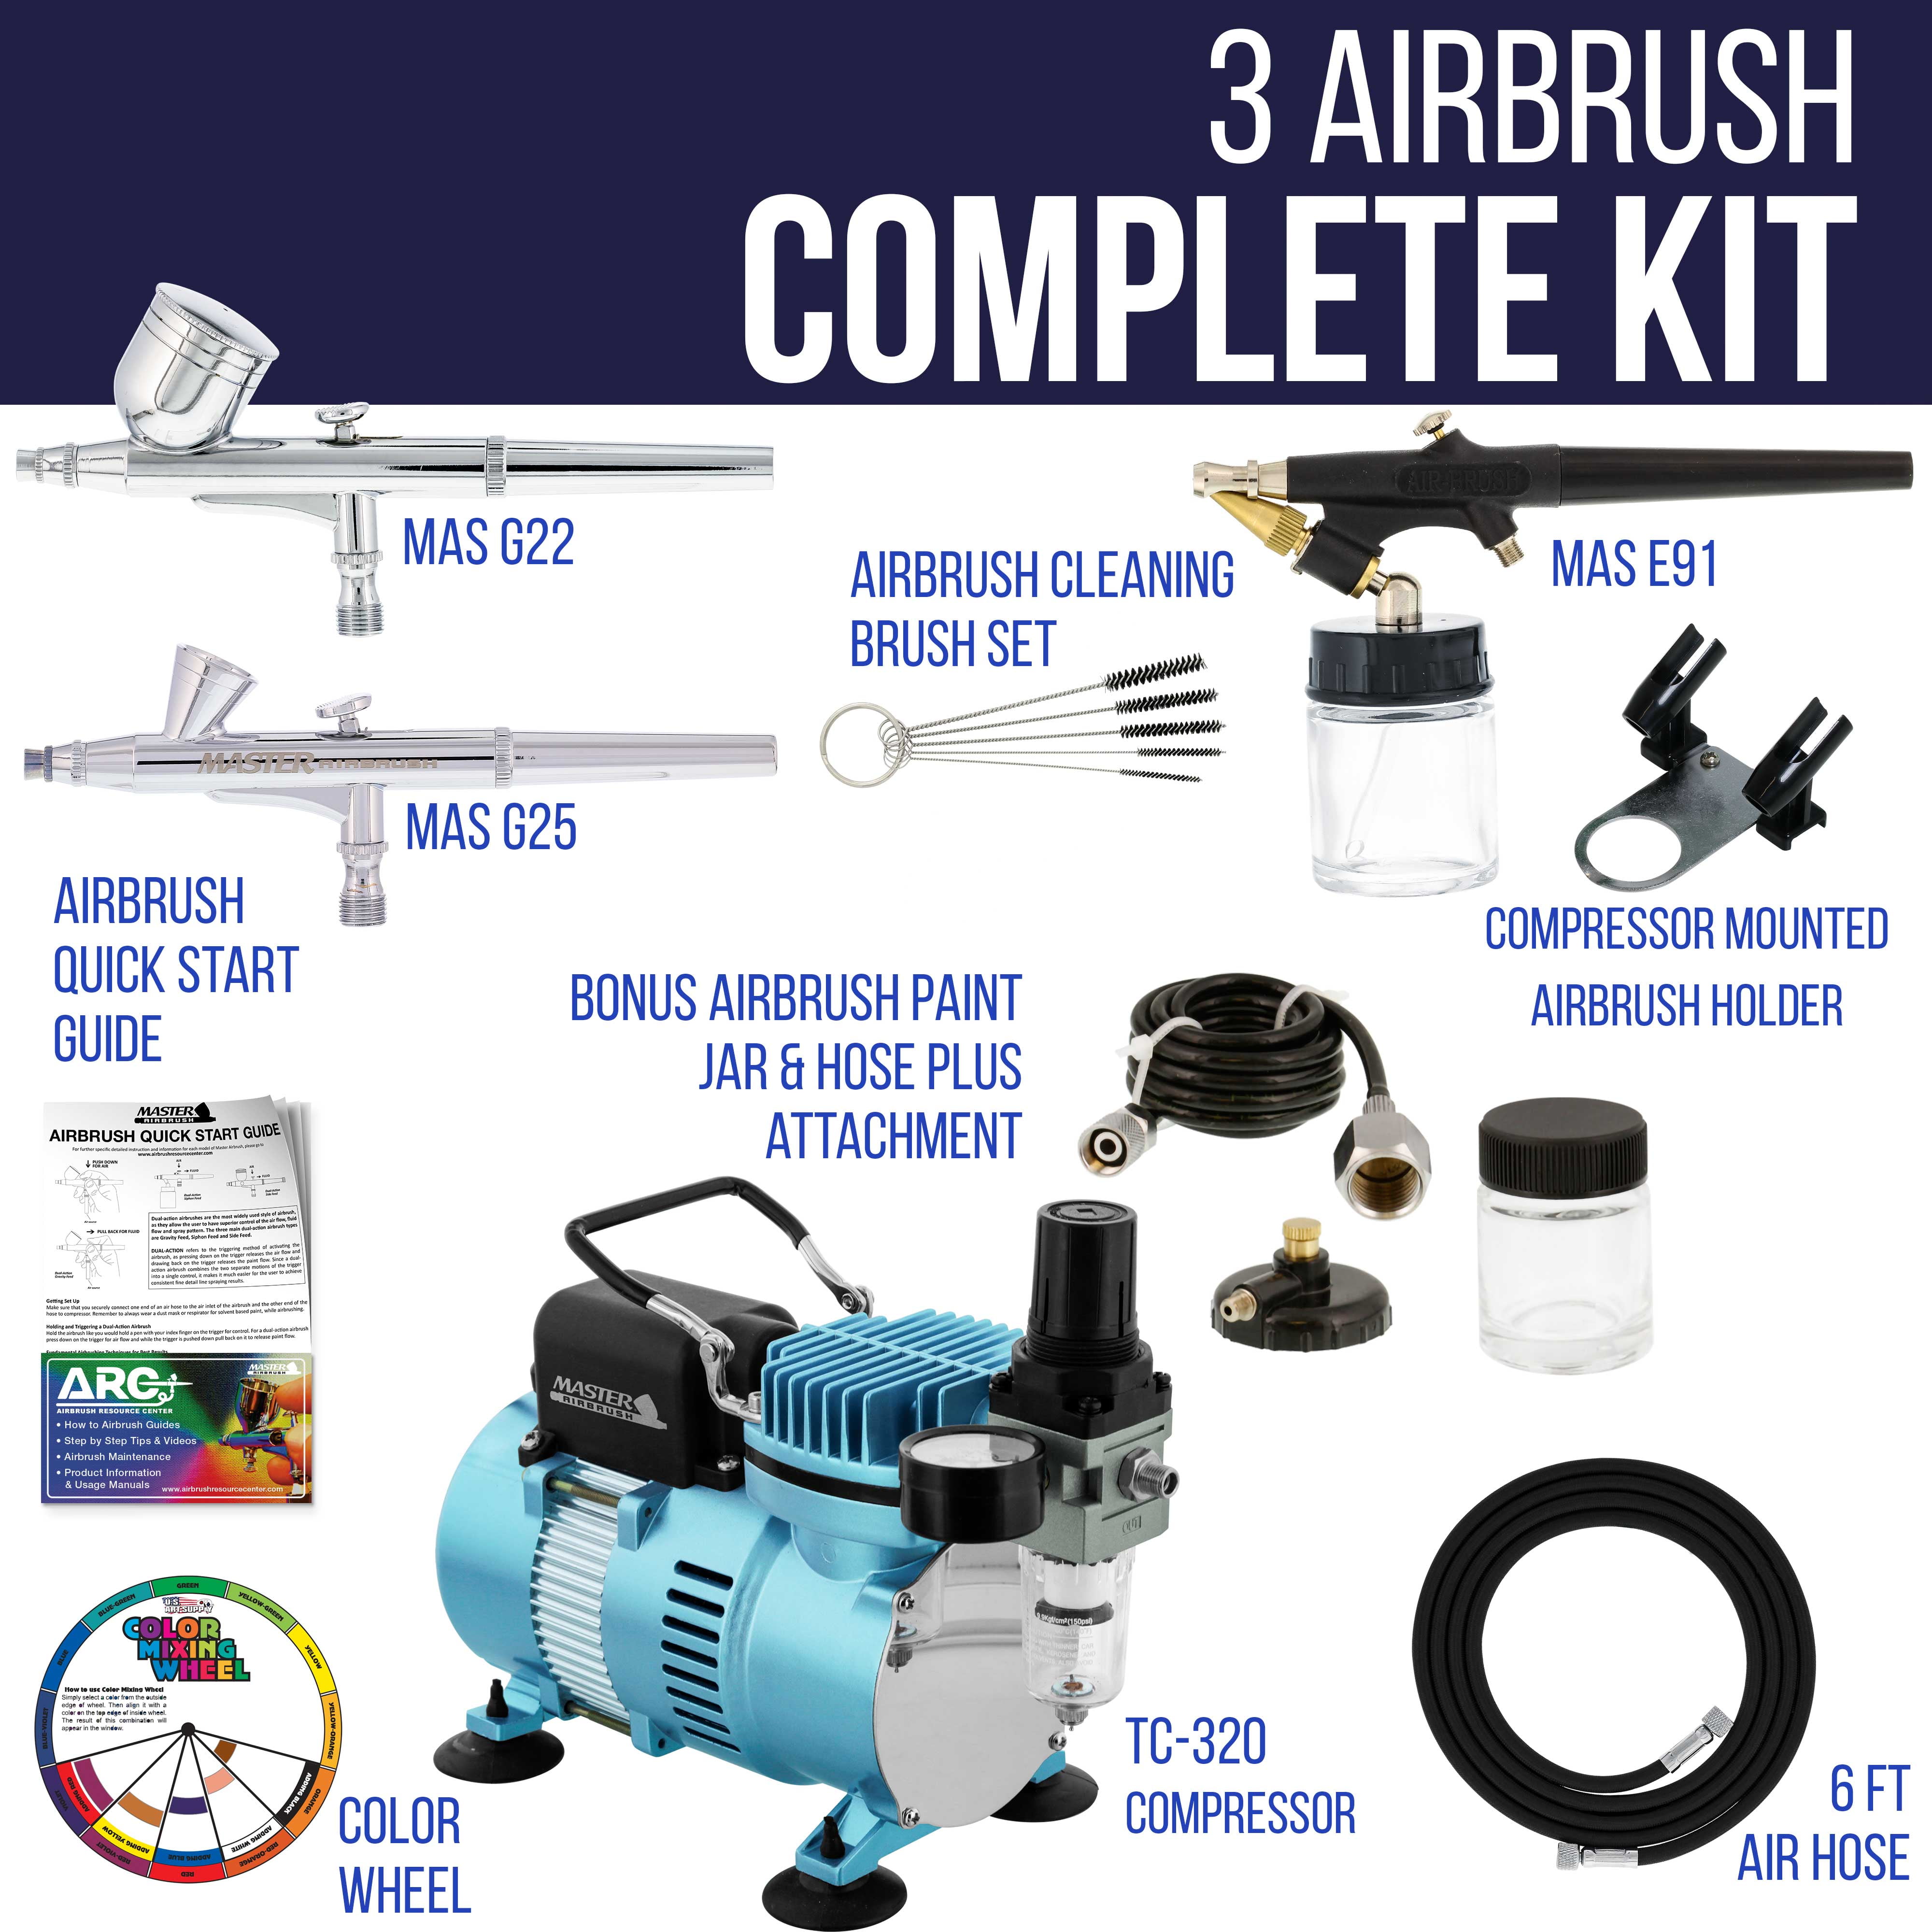 TCP Global Corp Master Airbrush Professional 3 Airbrush Kit with Compressor and Air Filter/Regulator